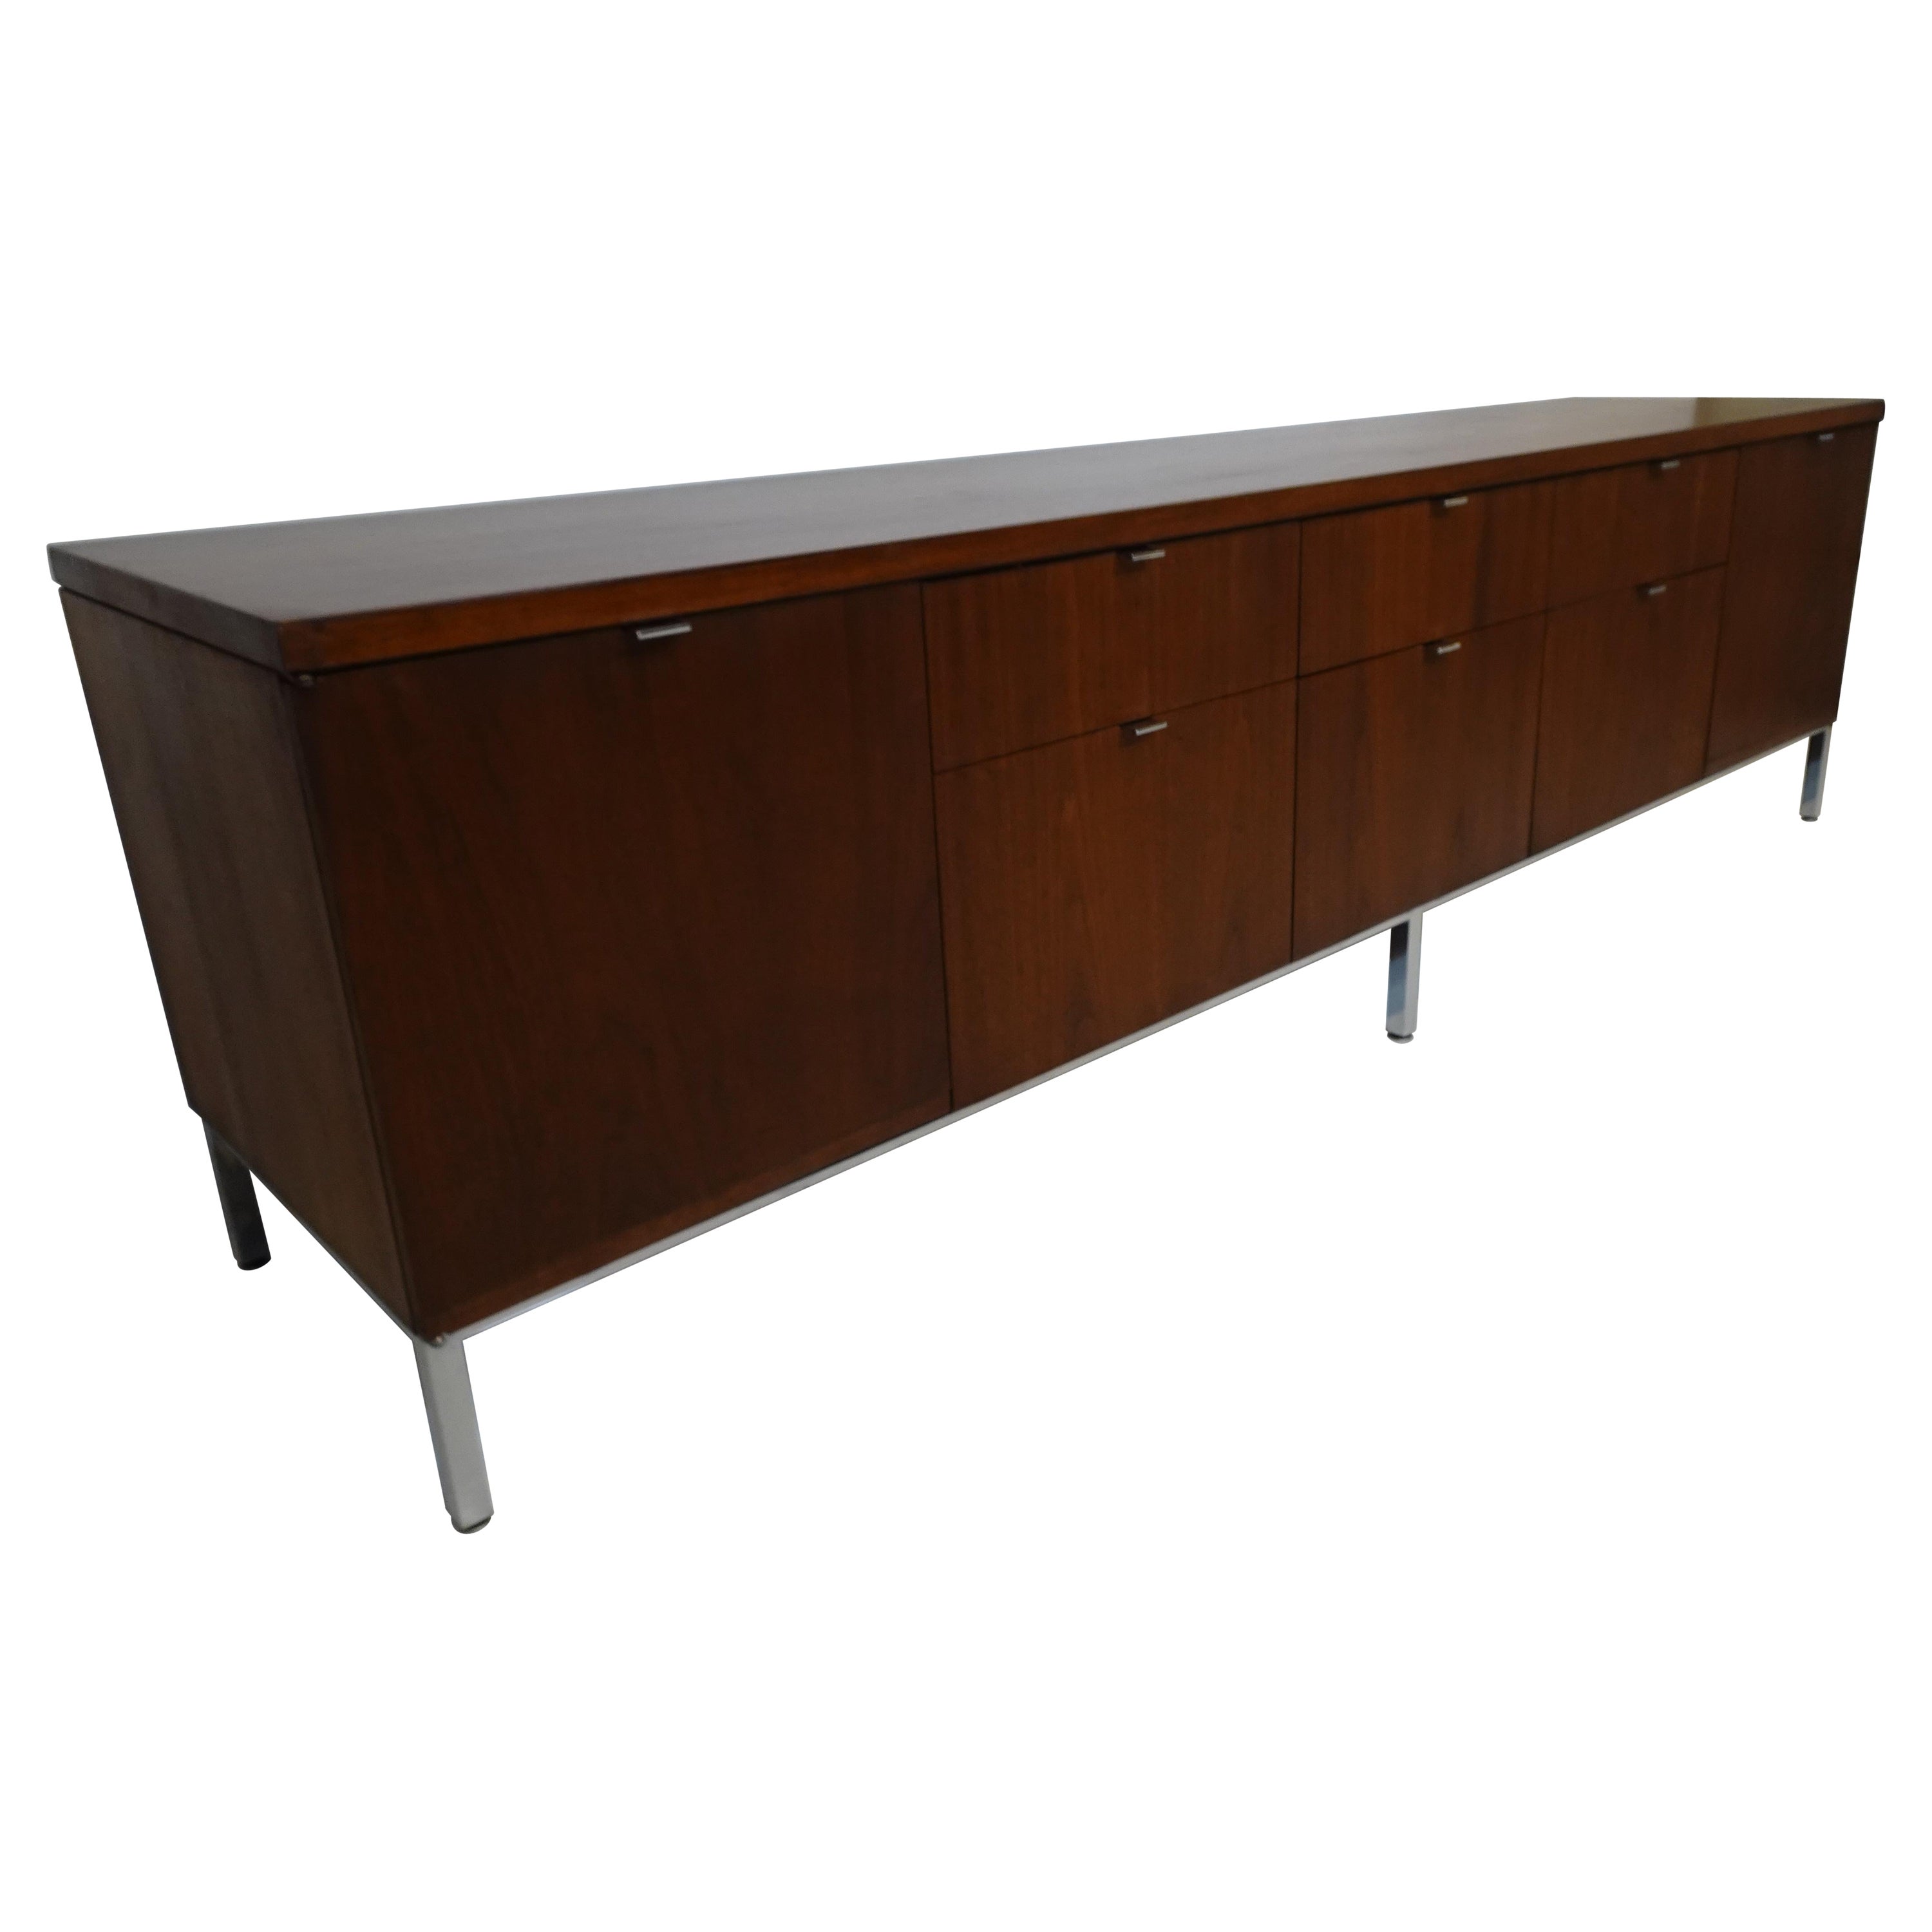 Stow Davis Walnut Credenza in the Style of Knoll